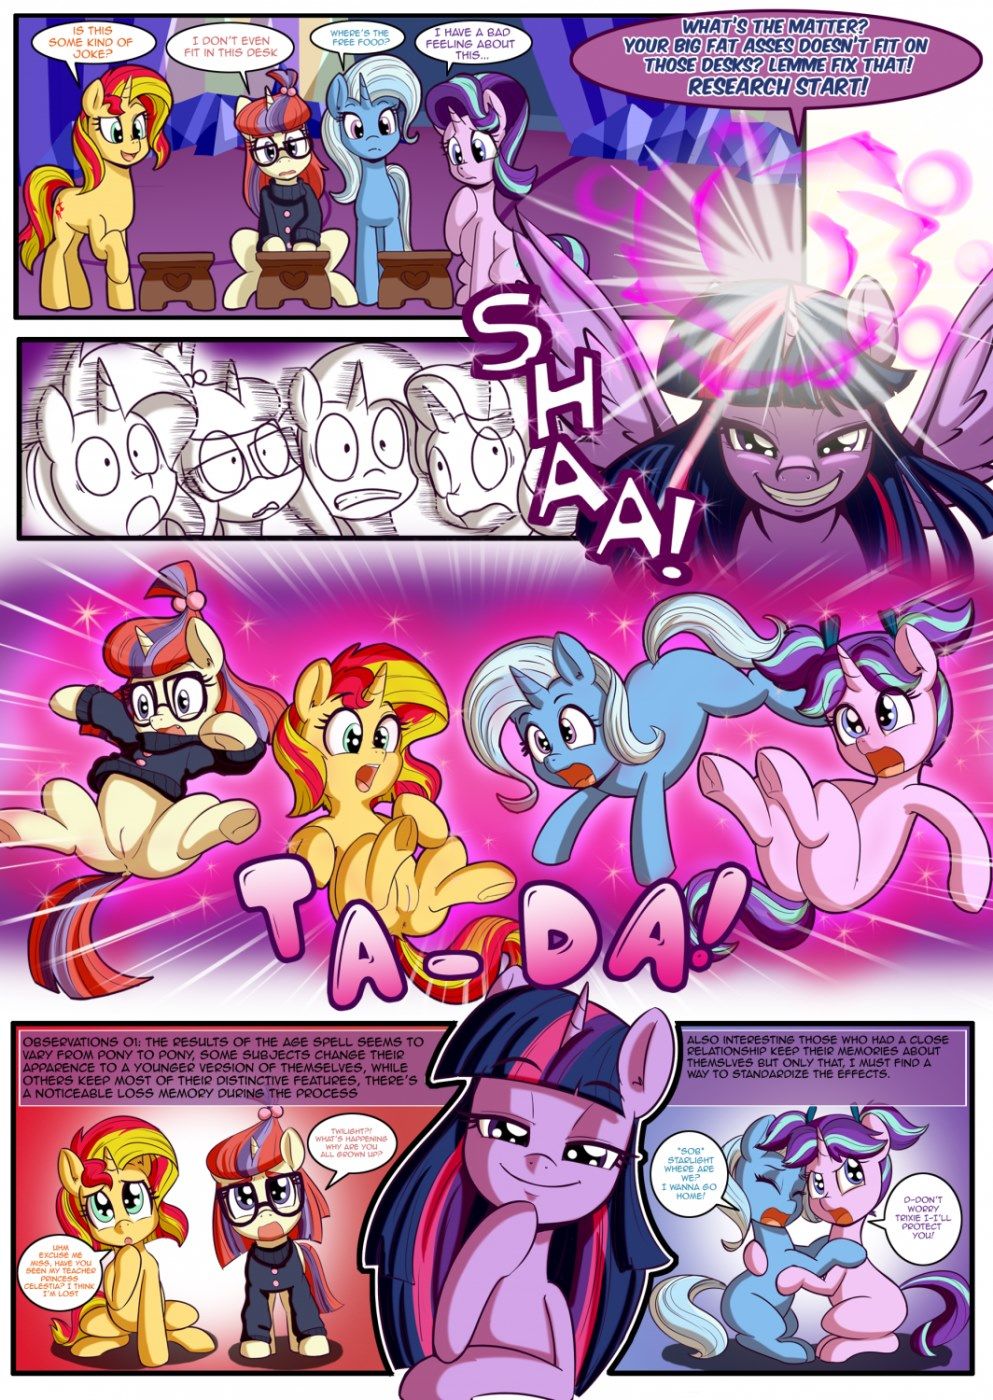 Back to Magic Kindergarten - Little Pony page 4